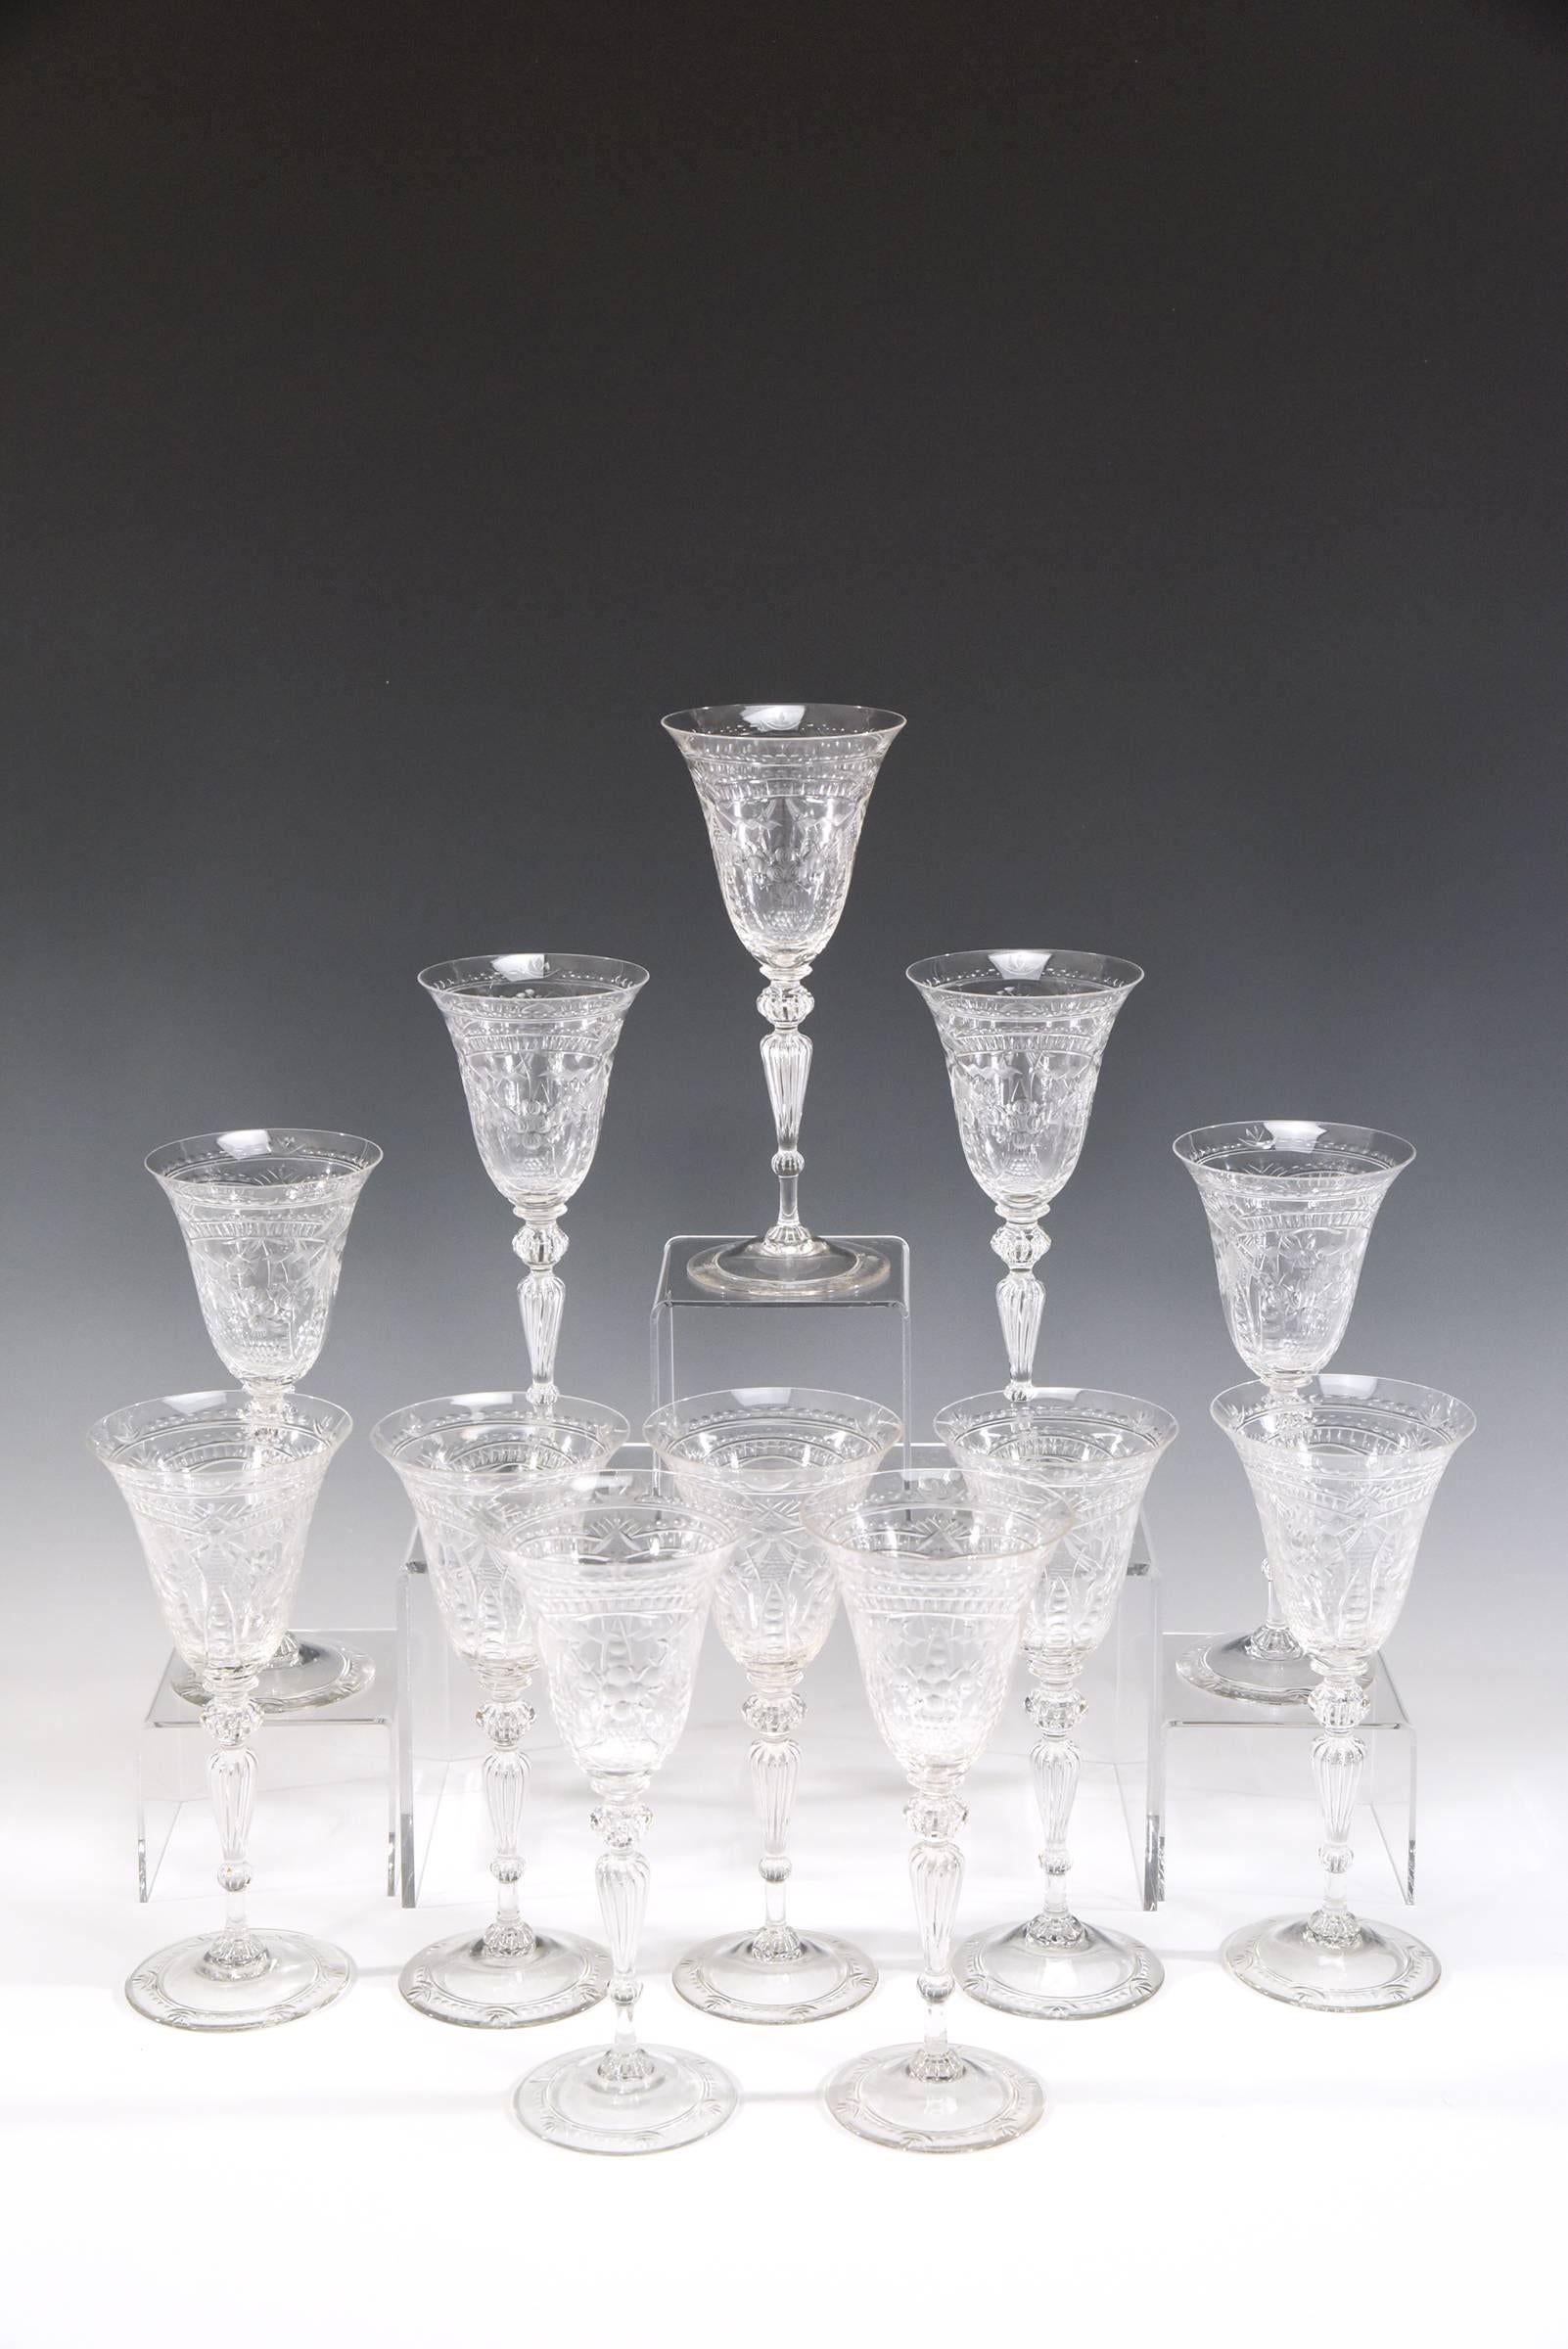 Not 1 but 12!! A rare treat for the Steuben collector. This is an amazing set of 12 handblown goblets made in the Venetian style and exhibiting all the qualities and craftsmanship of Steuben's finest works. The very tall but well balanced goblets